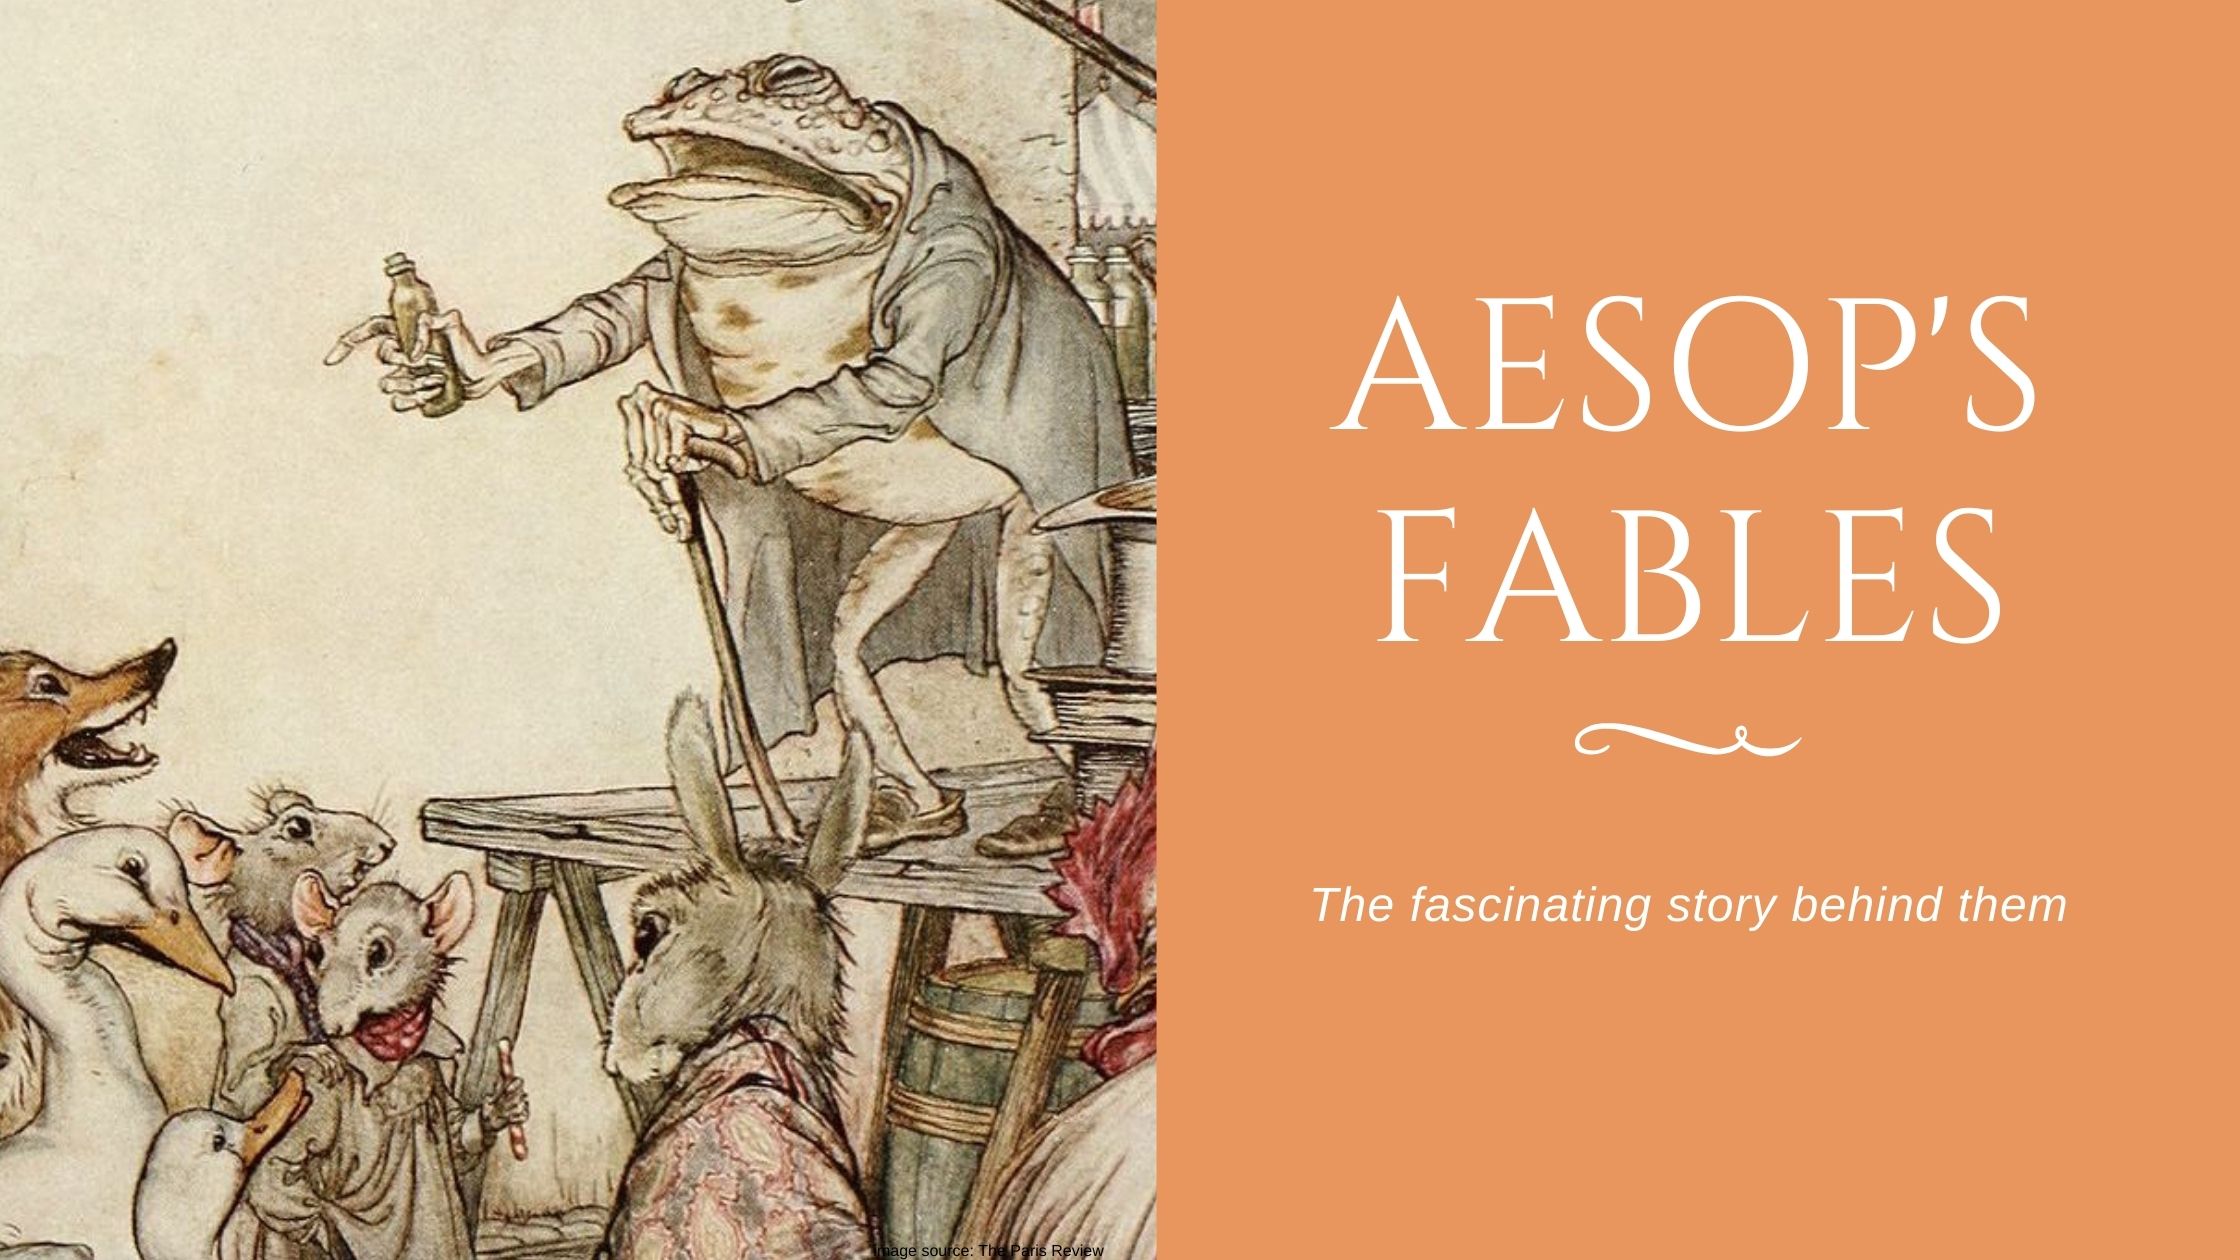 Aesop’s Fables: The fascinating story behind them